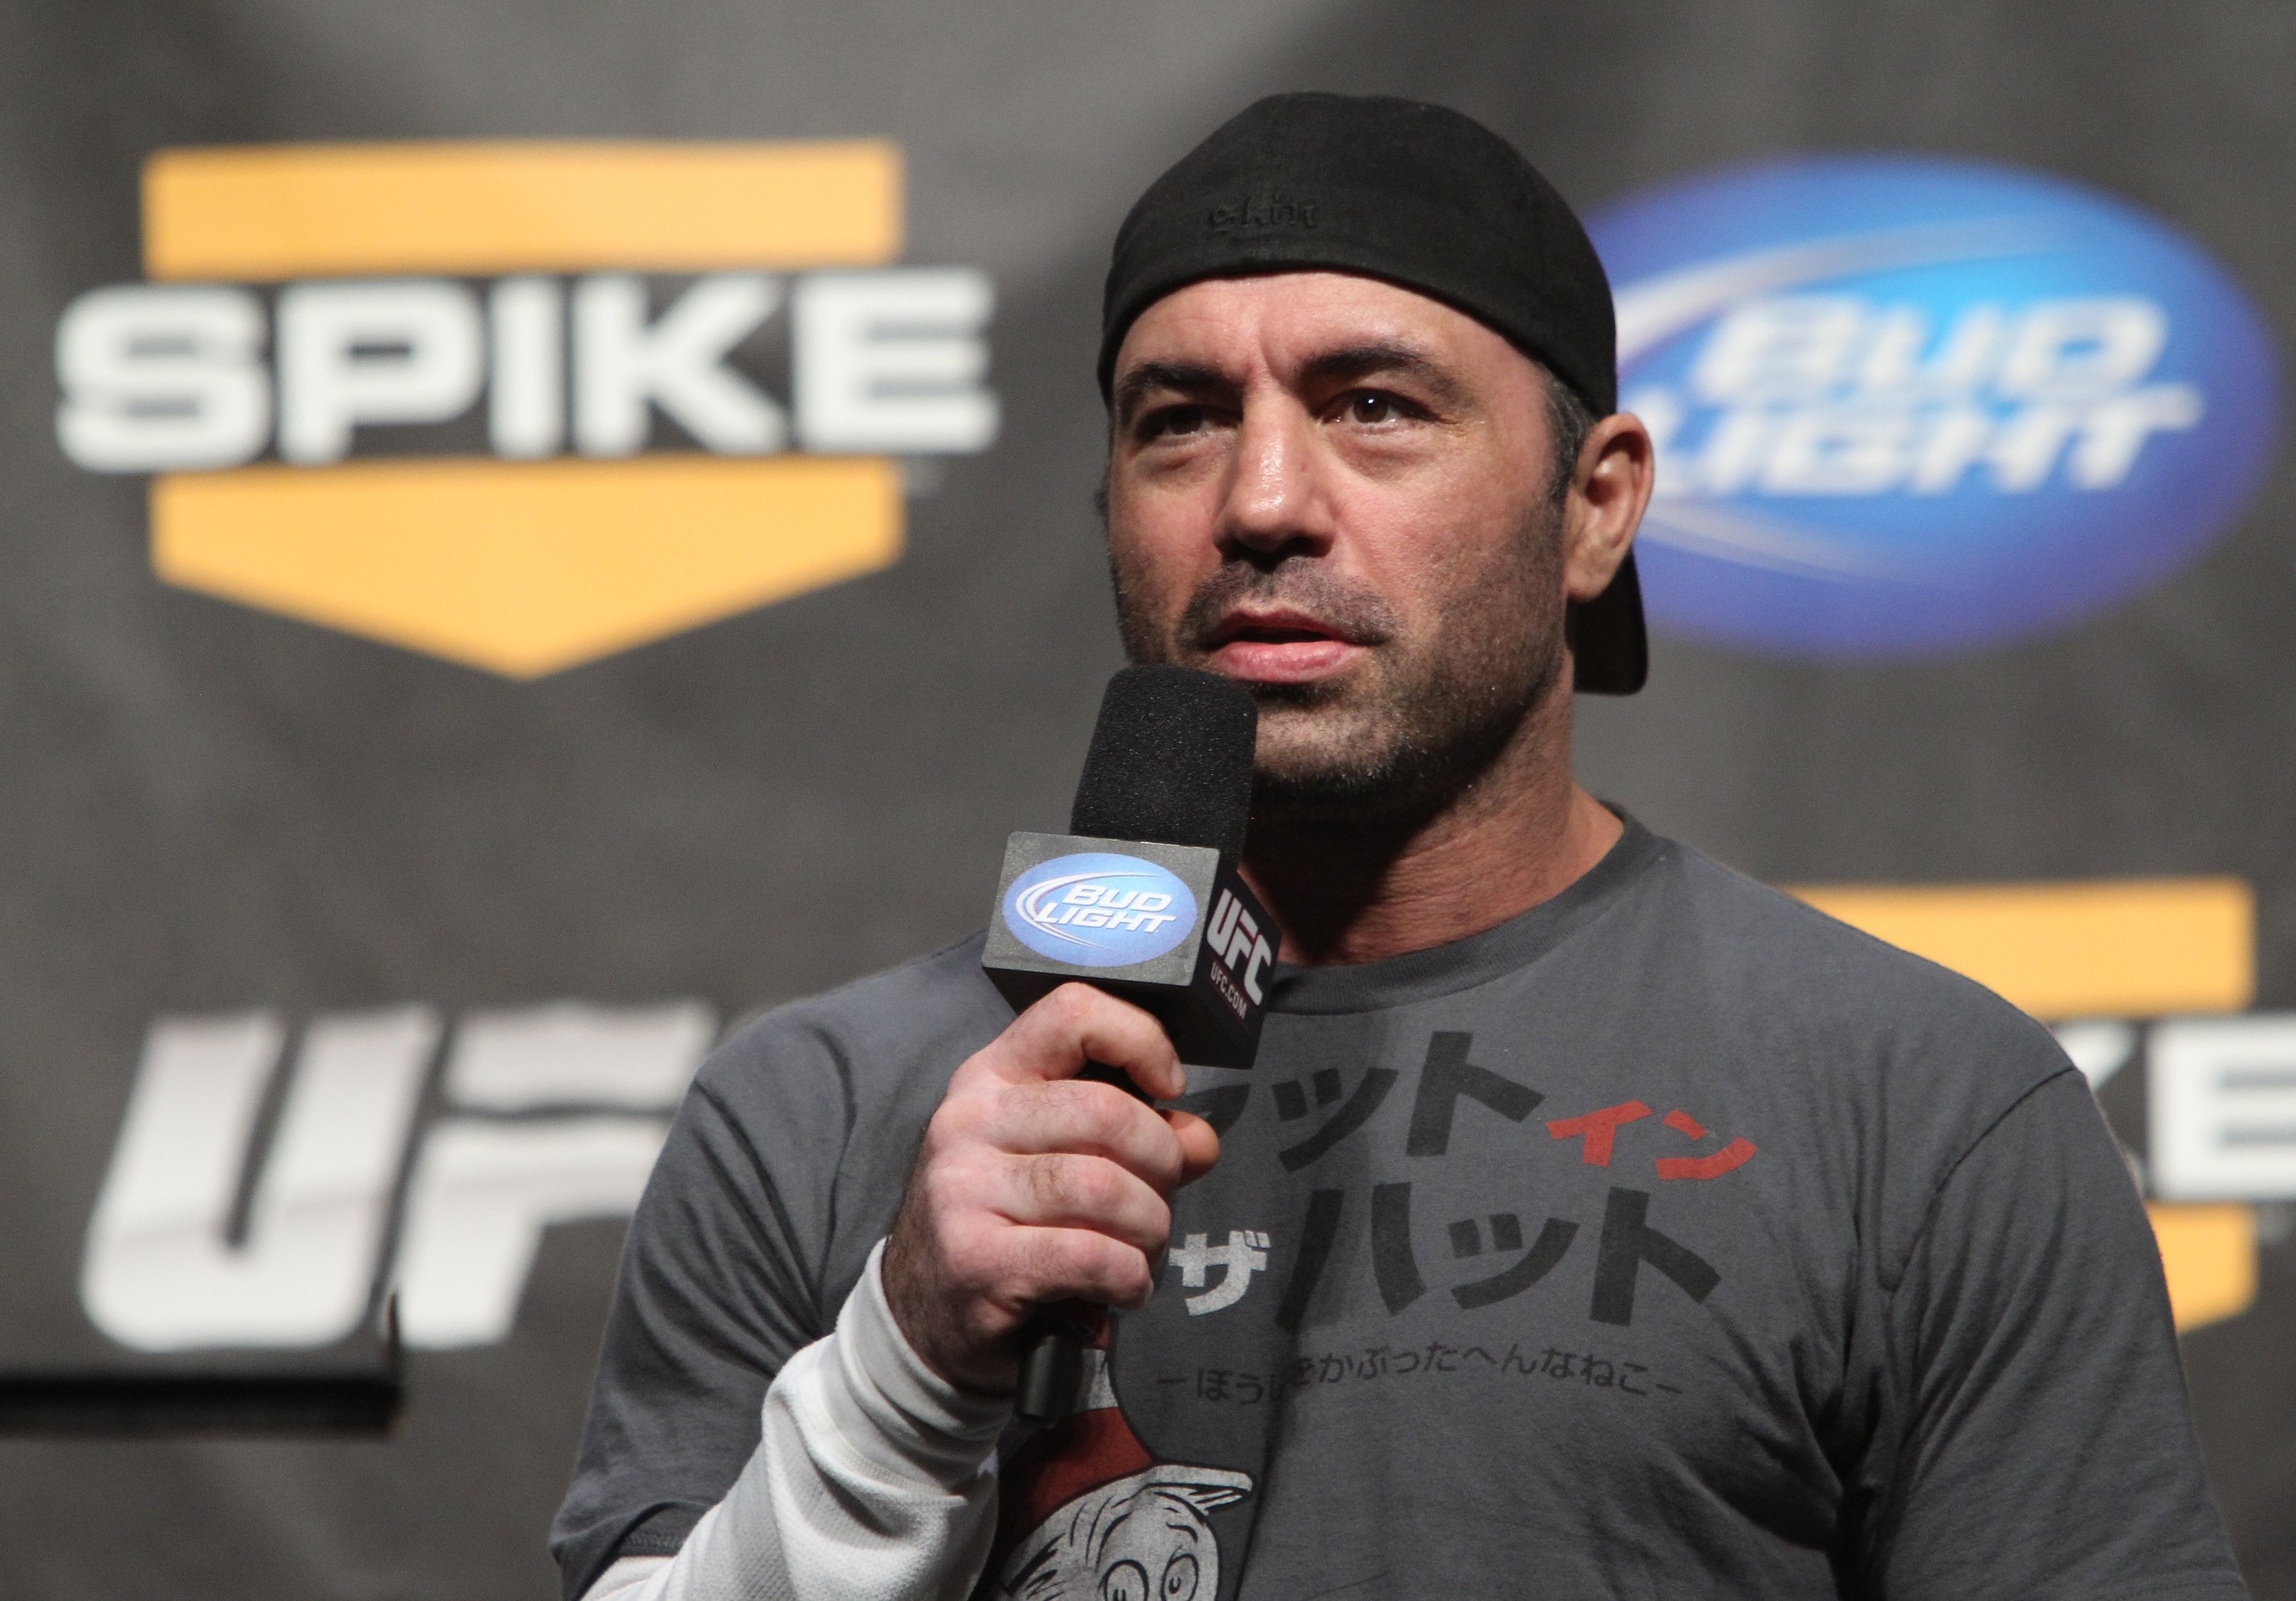 Joe Rogan answers questions from the fans at the UFC Fight Night 24 weigh-in at Key Arena on March 25, 2011, in Seattle, Washington. | Source: Getty Images